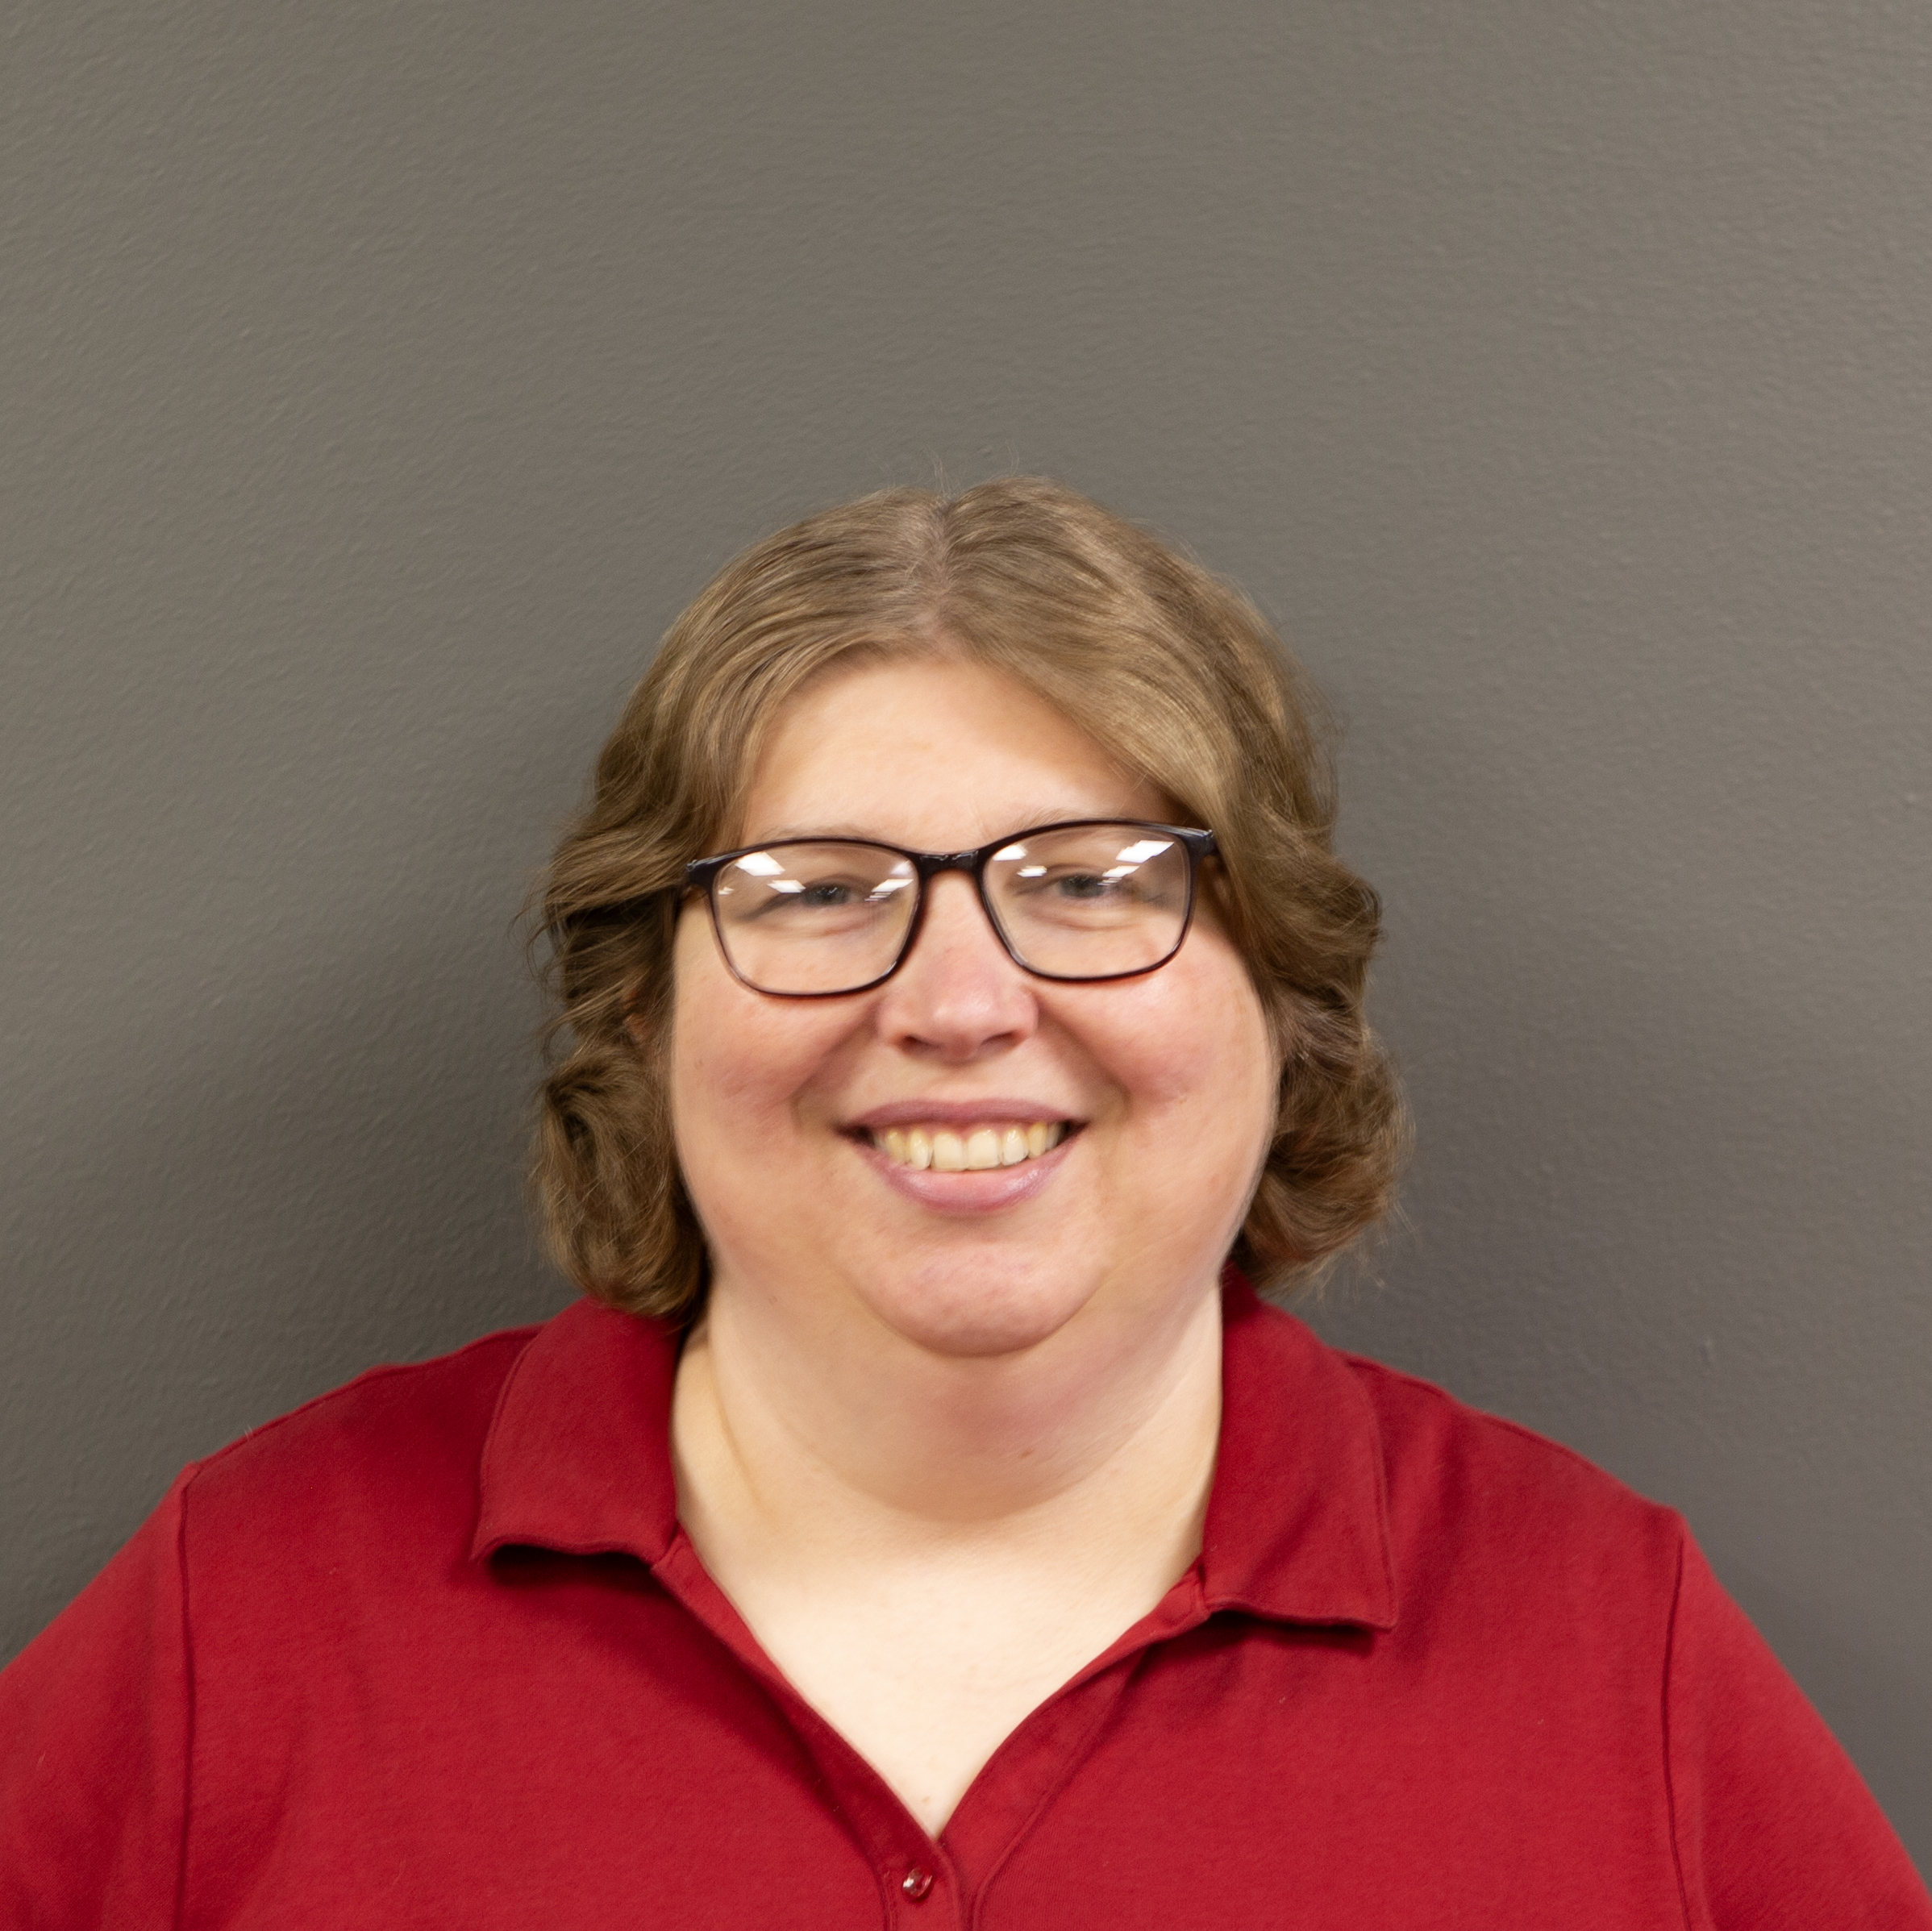 Tammy is a middle aged white woman with curly light brown hair that is cut to the middle of her neck. It is parted in the middle. She wears rectangular glasses that are dark and plastic. She is smiling kindly and wearing a bright red polo shirt while standing in front of a solid gray wall.